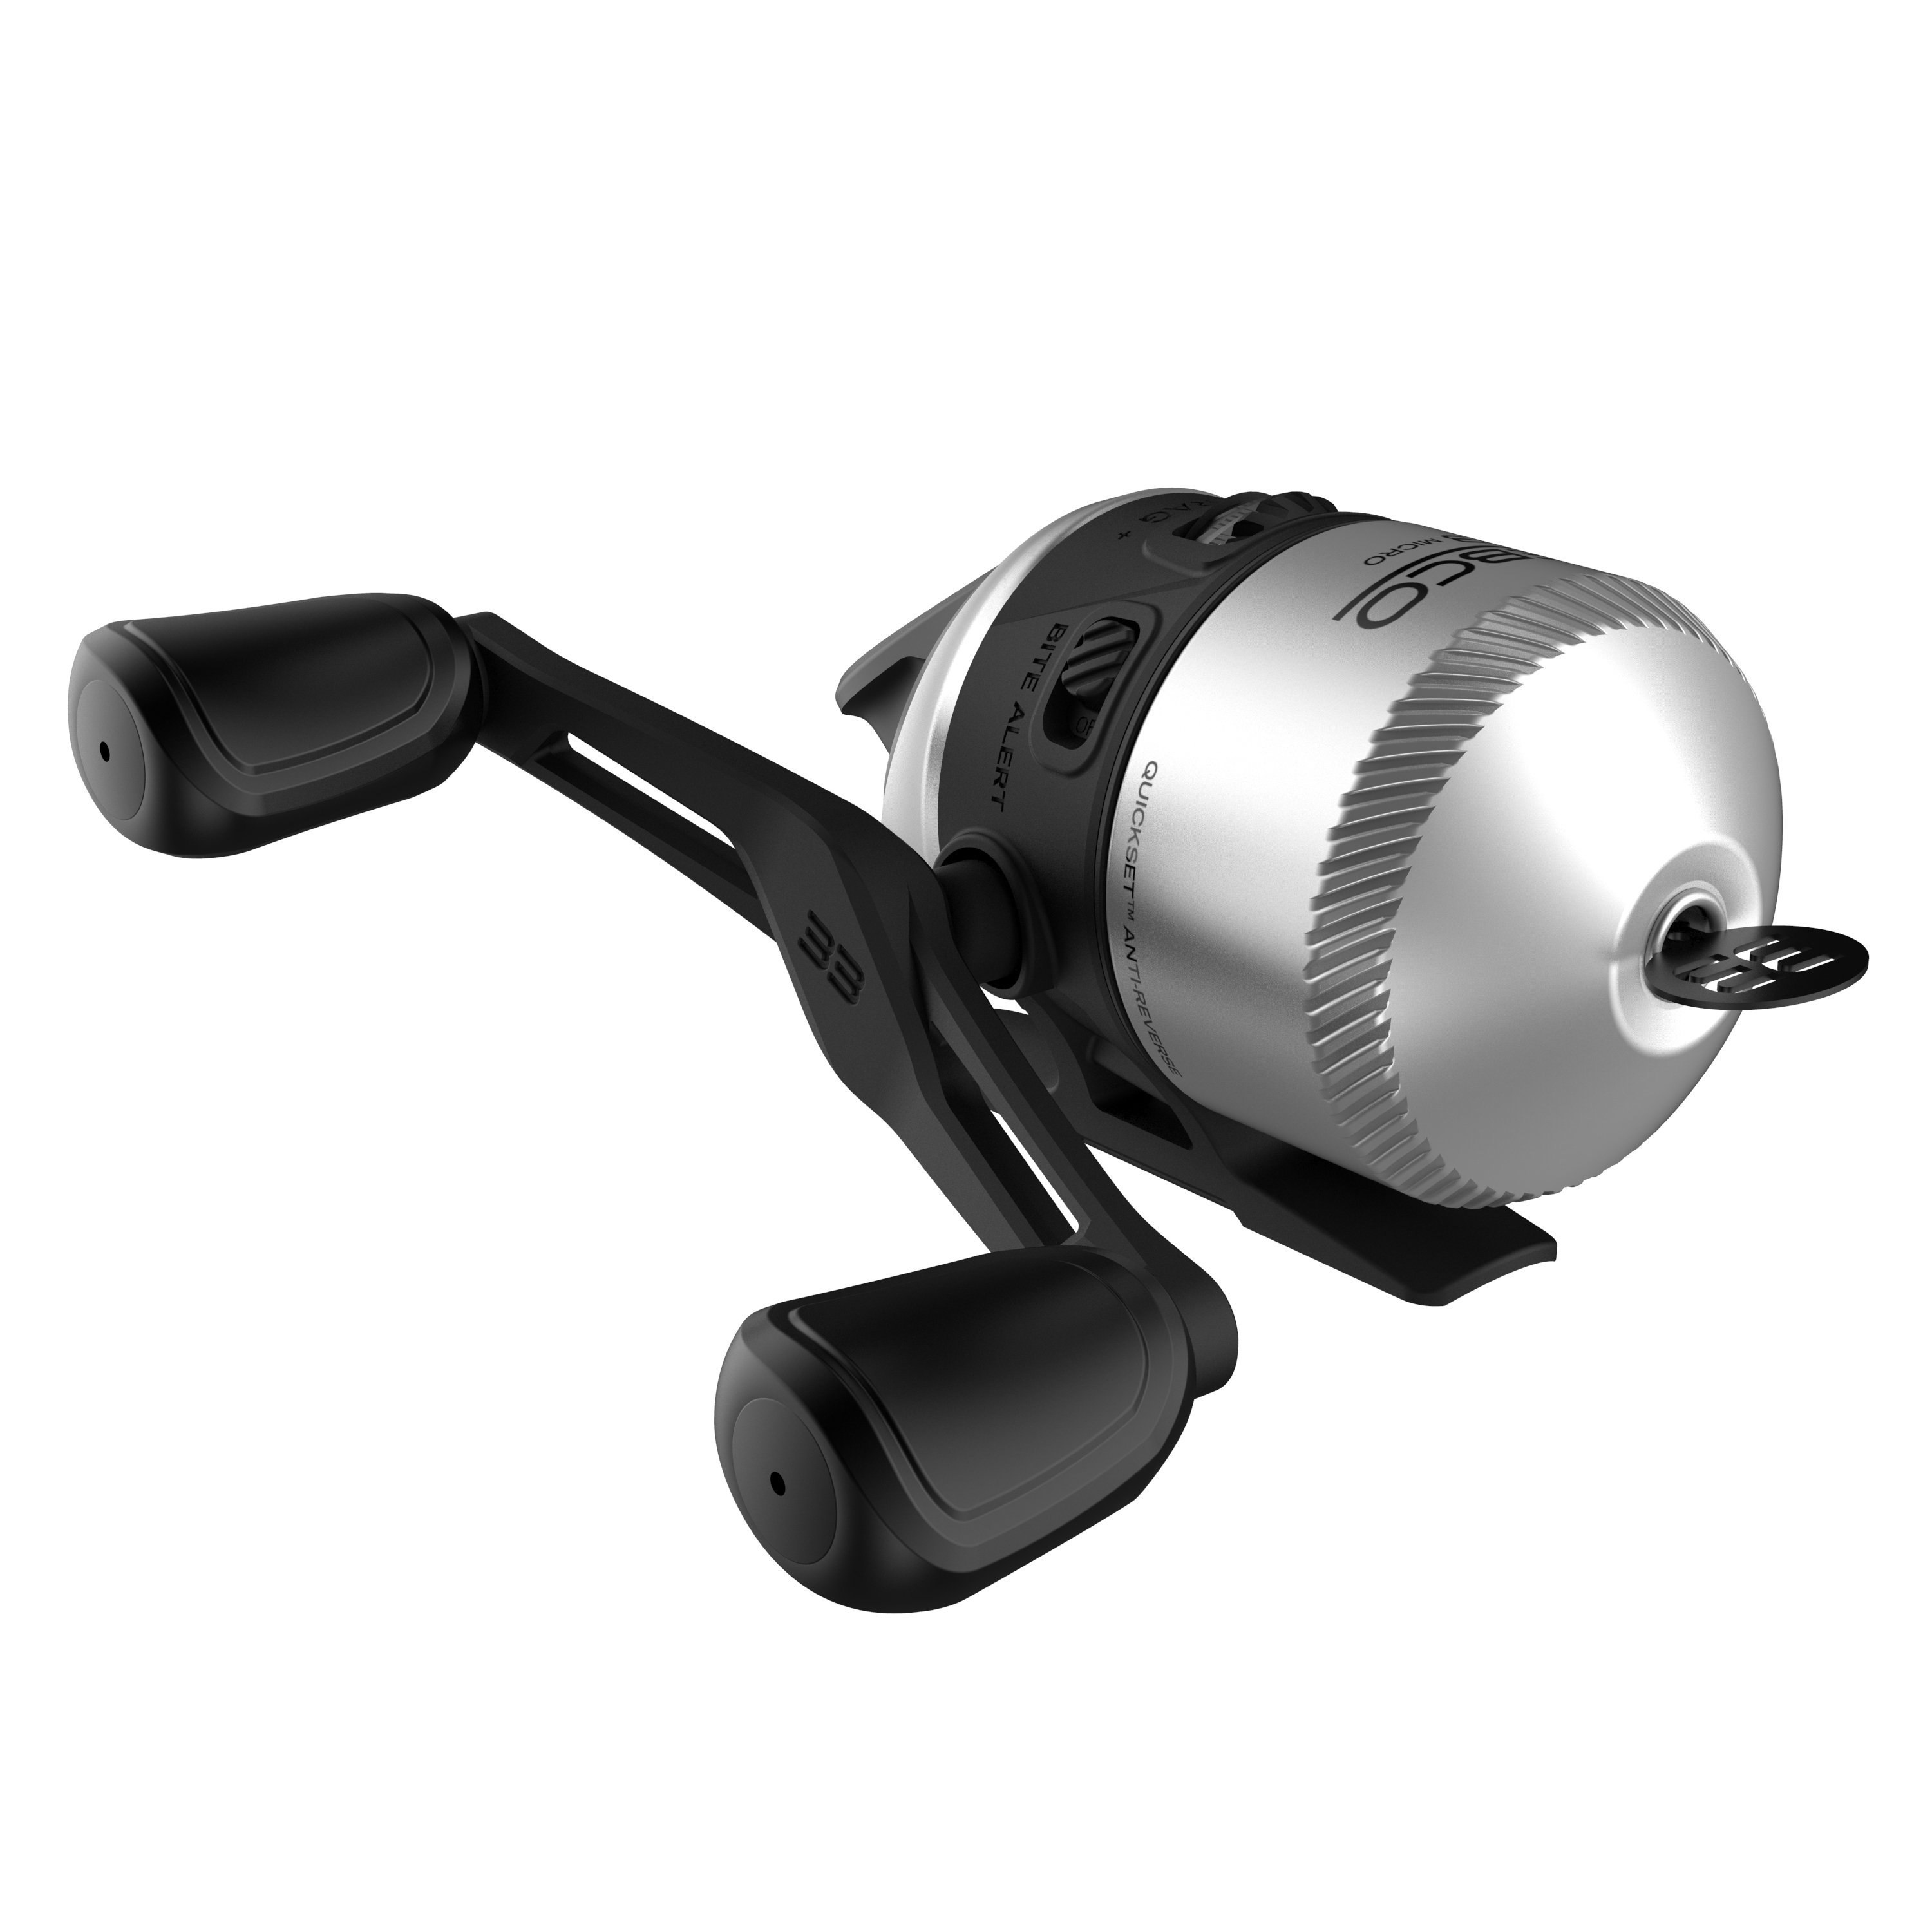 Zebco 202 Fishing Reel Review - Everything You Need to Know! 